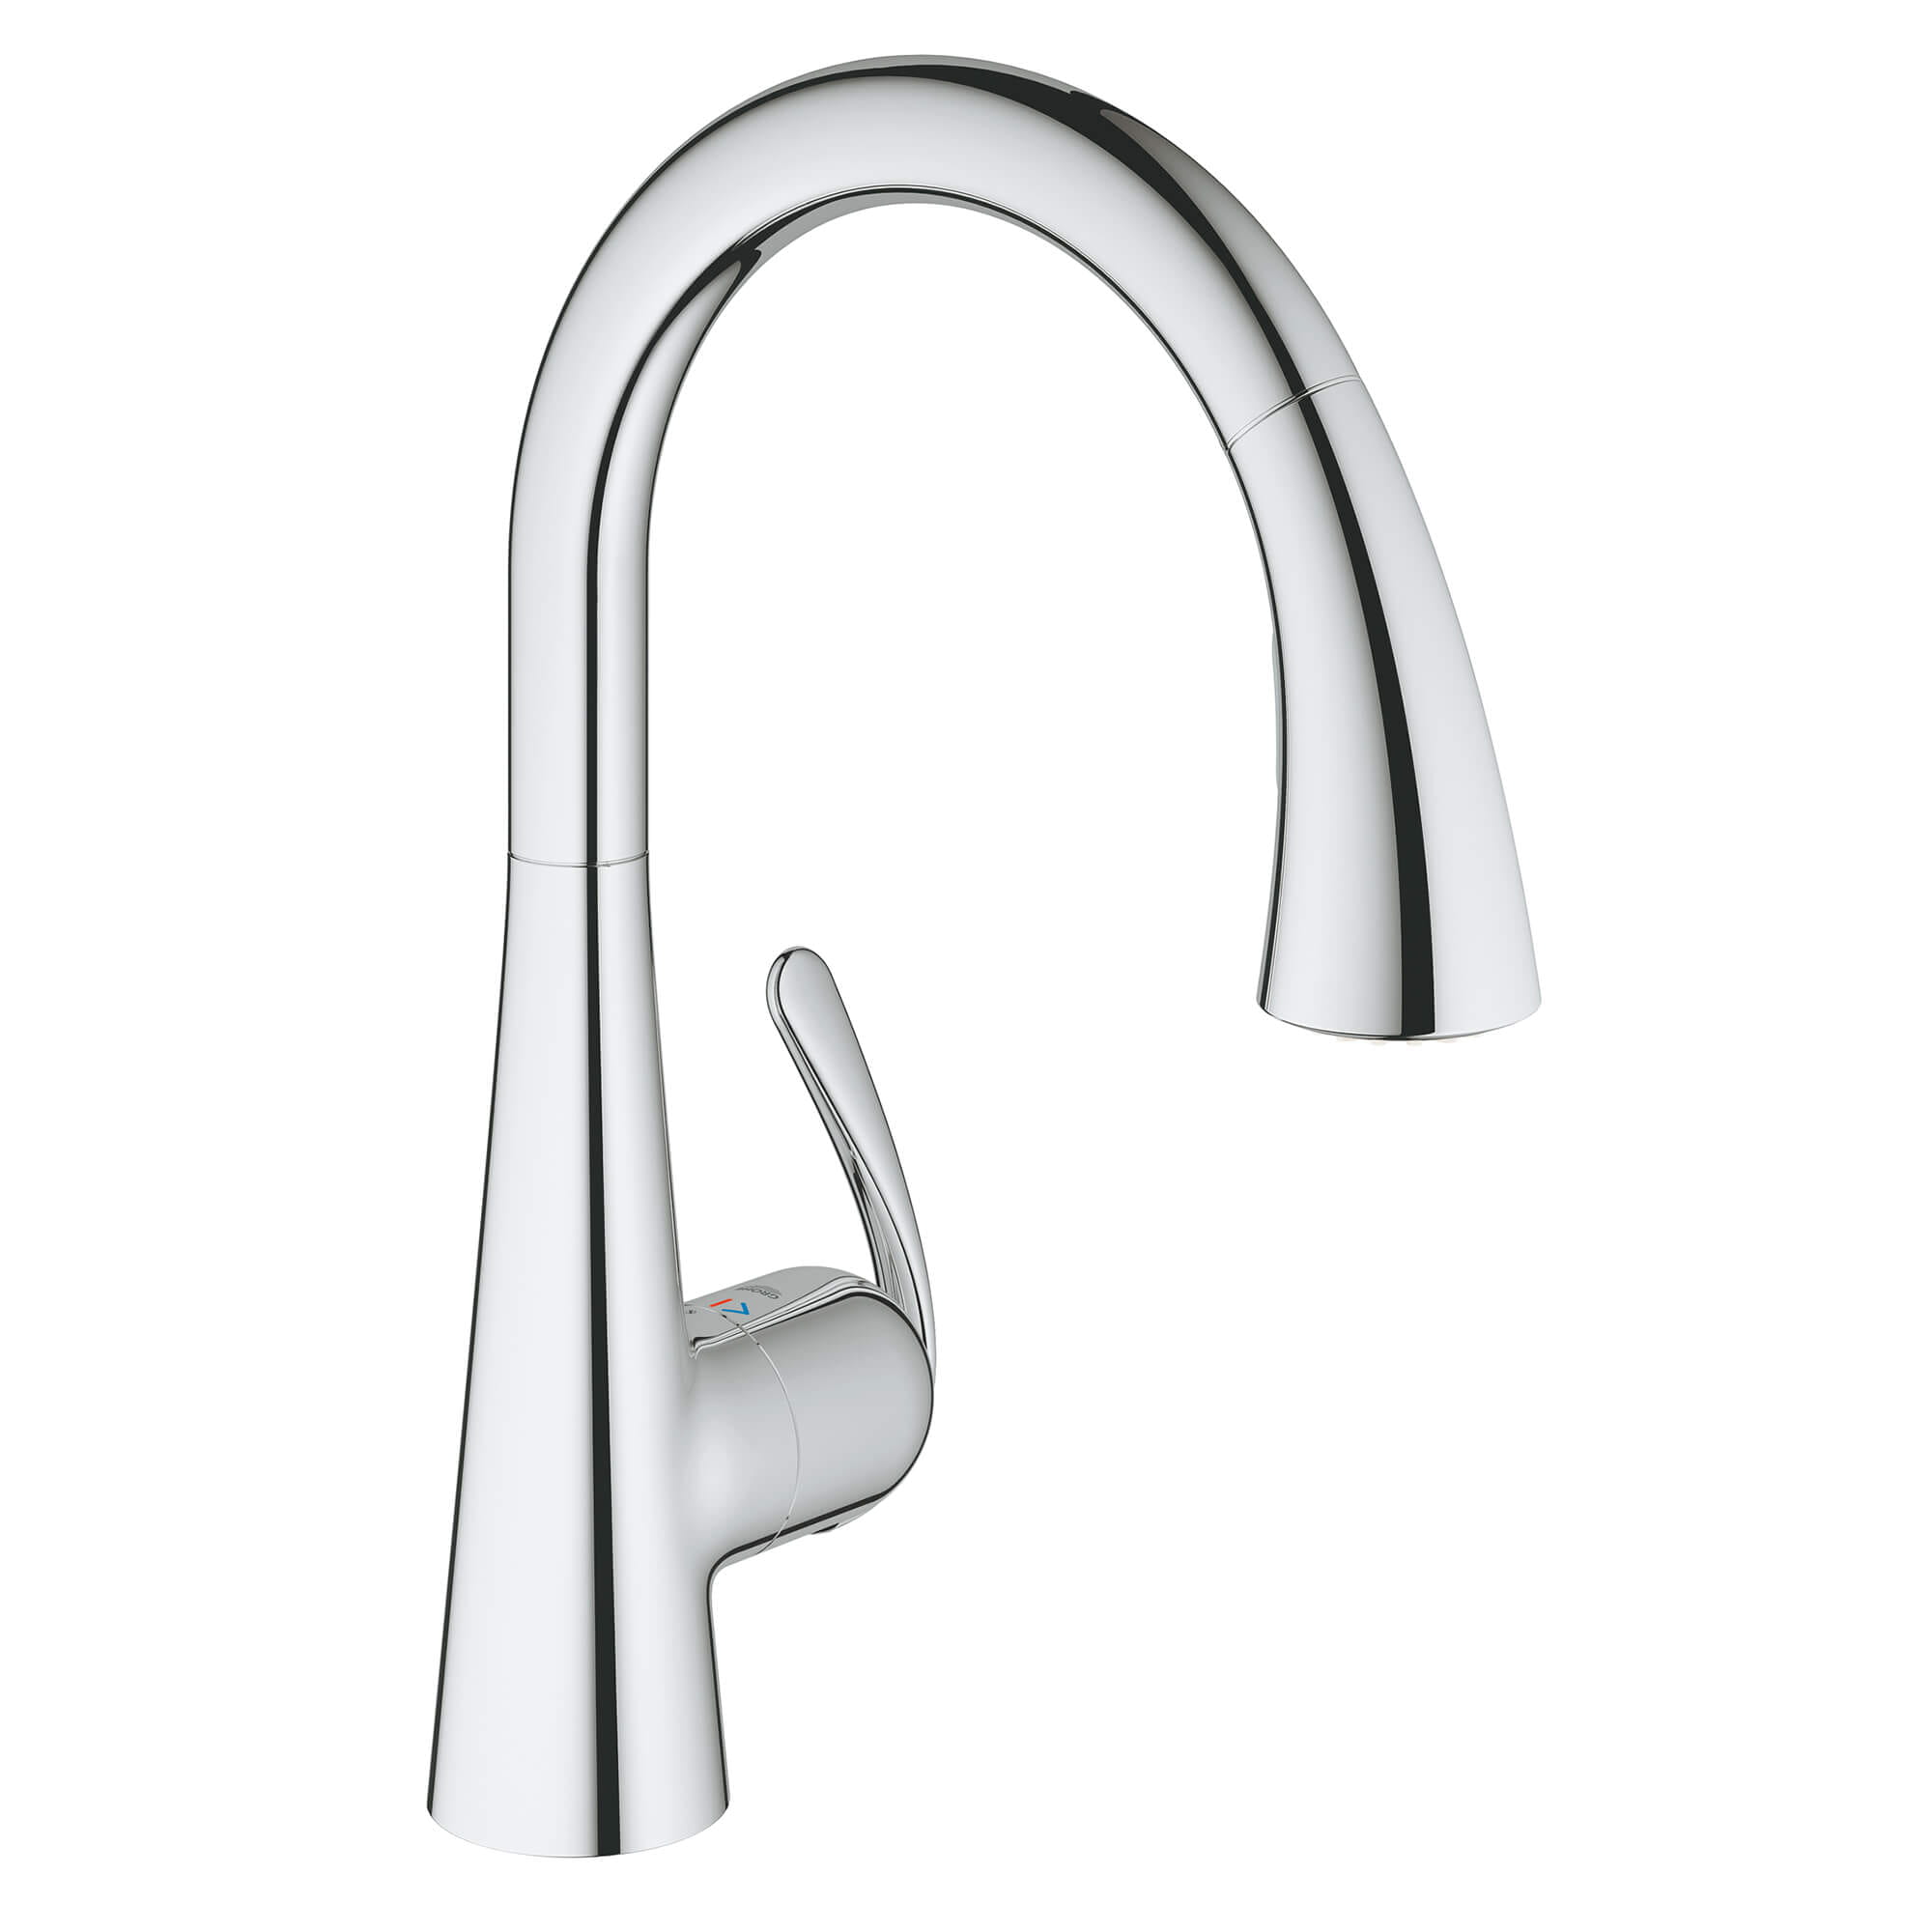 Touchless FootControl Single Handle Pull Down Kitchen Faucet Dual Spray 175 GPM GROHE CHROME